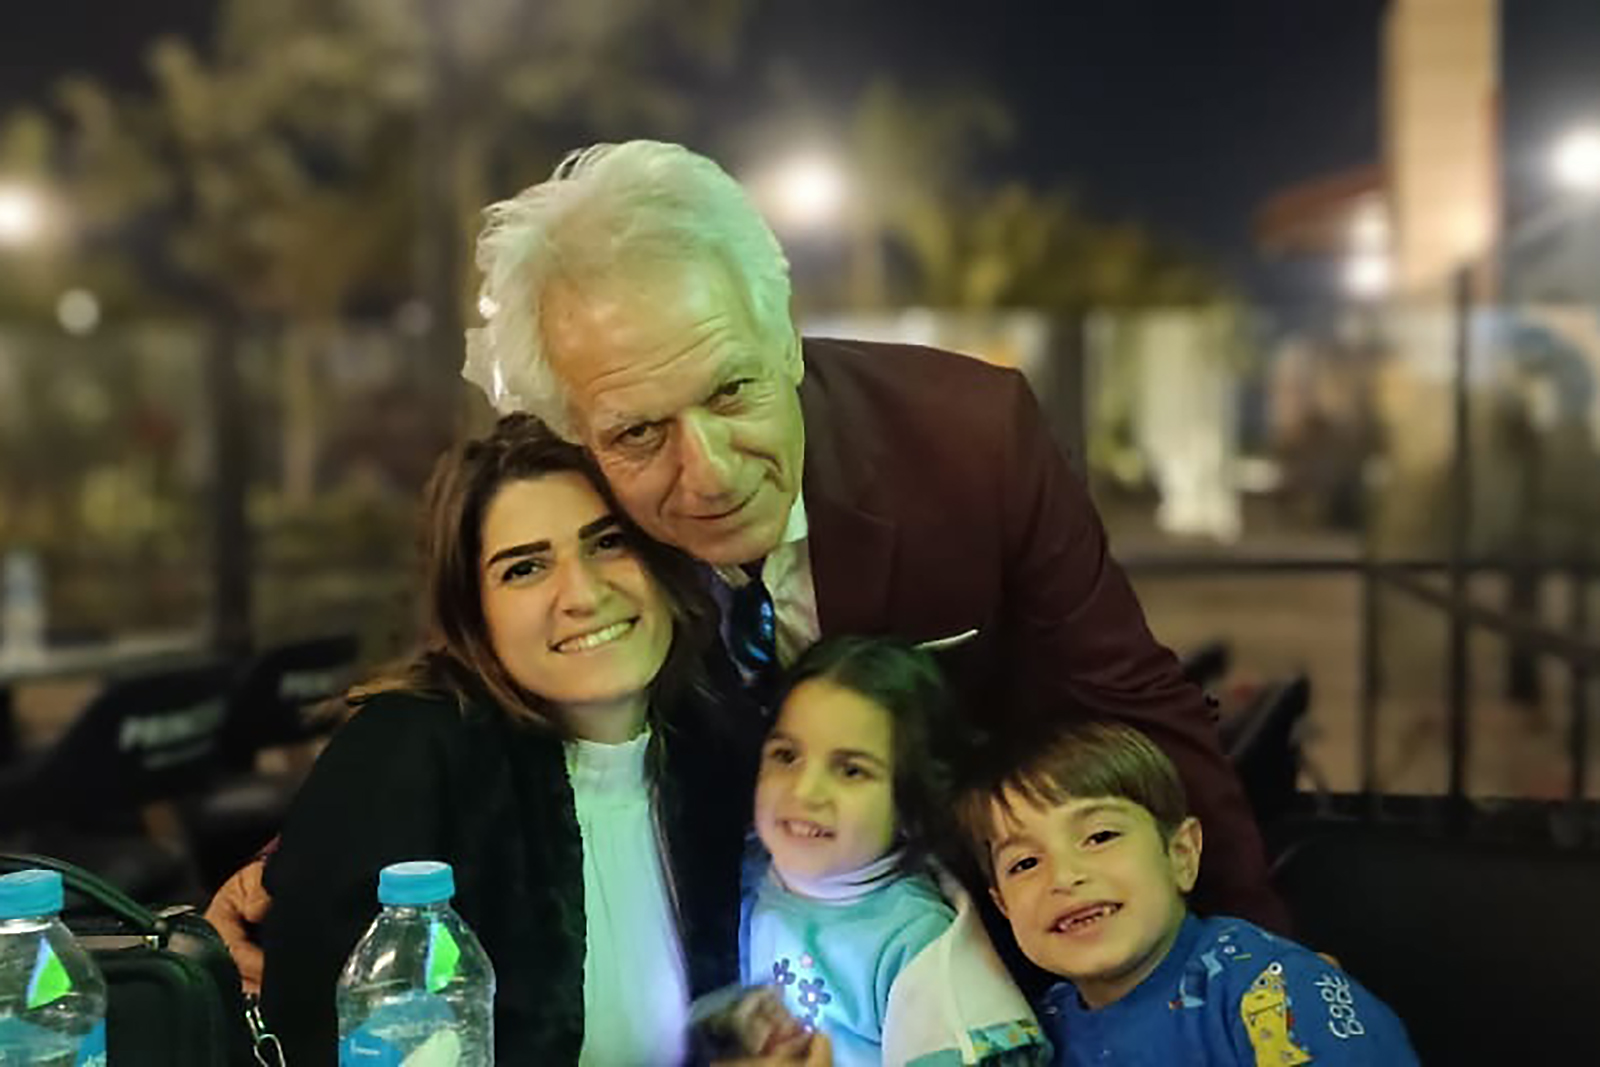 An older man in a suit hugs two smiling children and a woman outdoors at night.